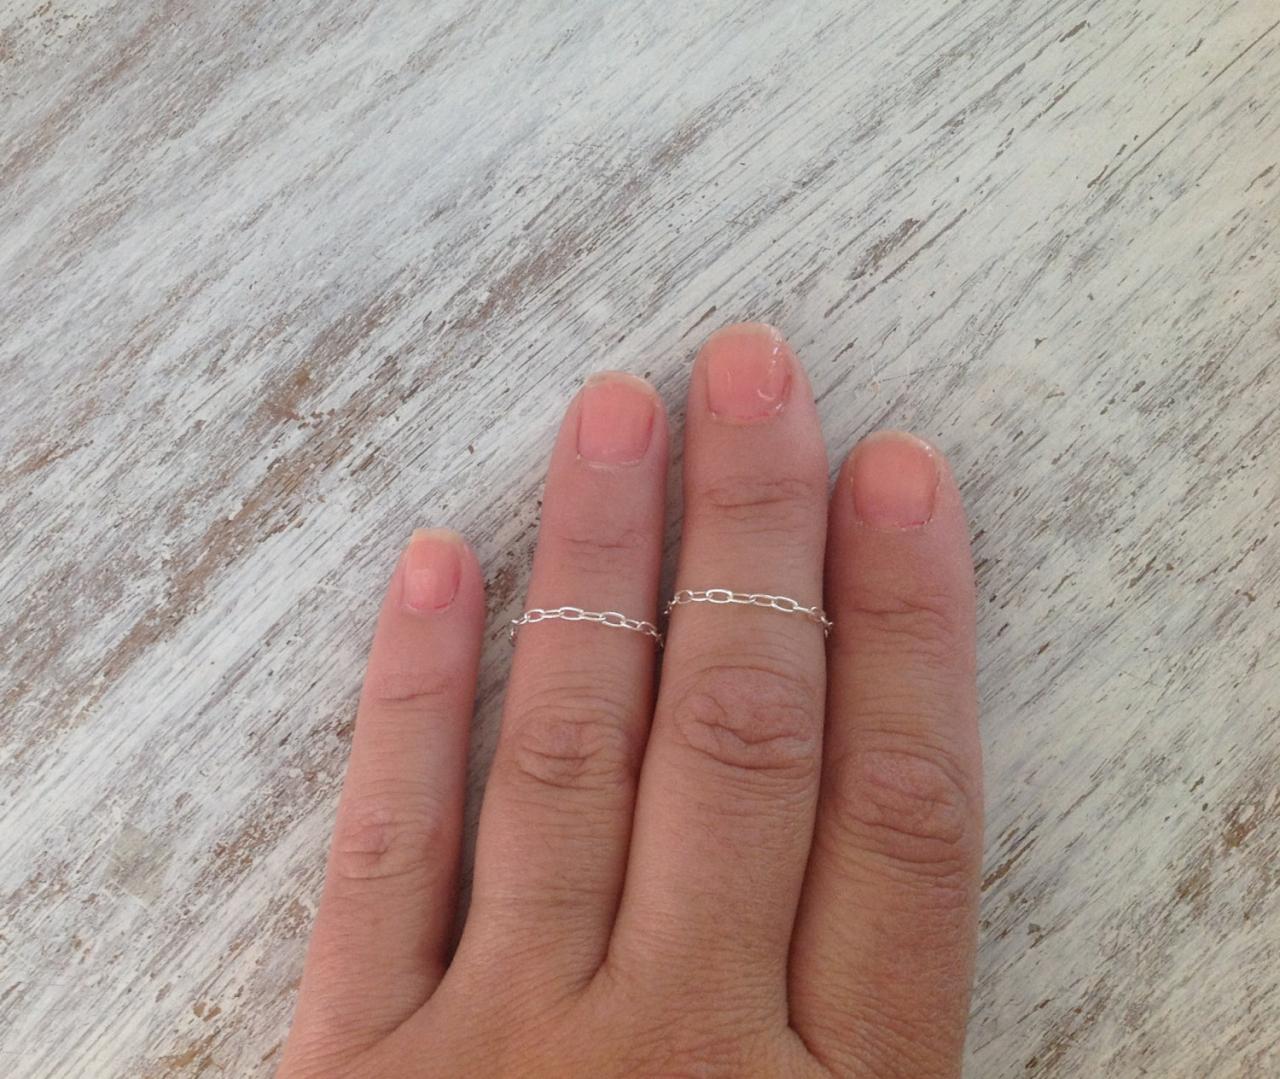 Silver ring, chain knuckle rings, stacking rings, knuckle rings, silver rings, thin ring, stackable rings, any size A536